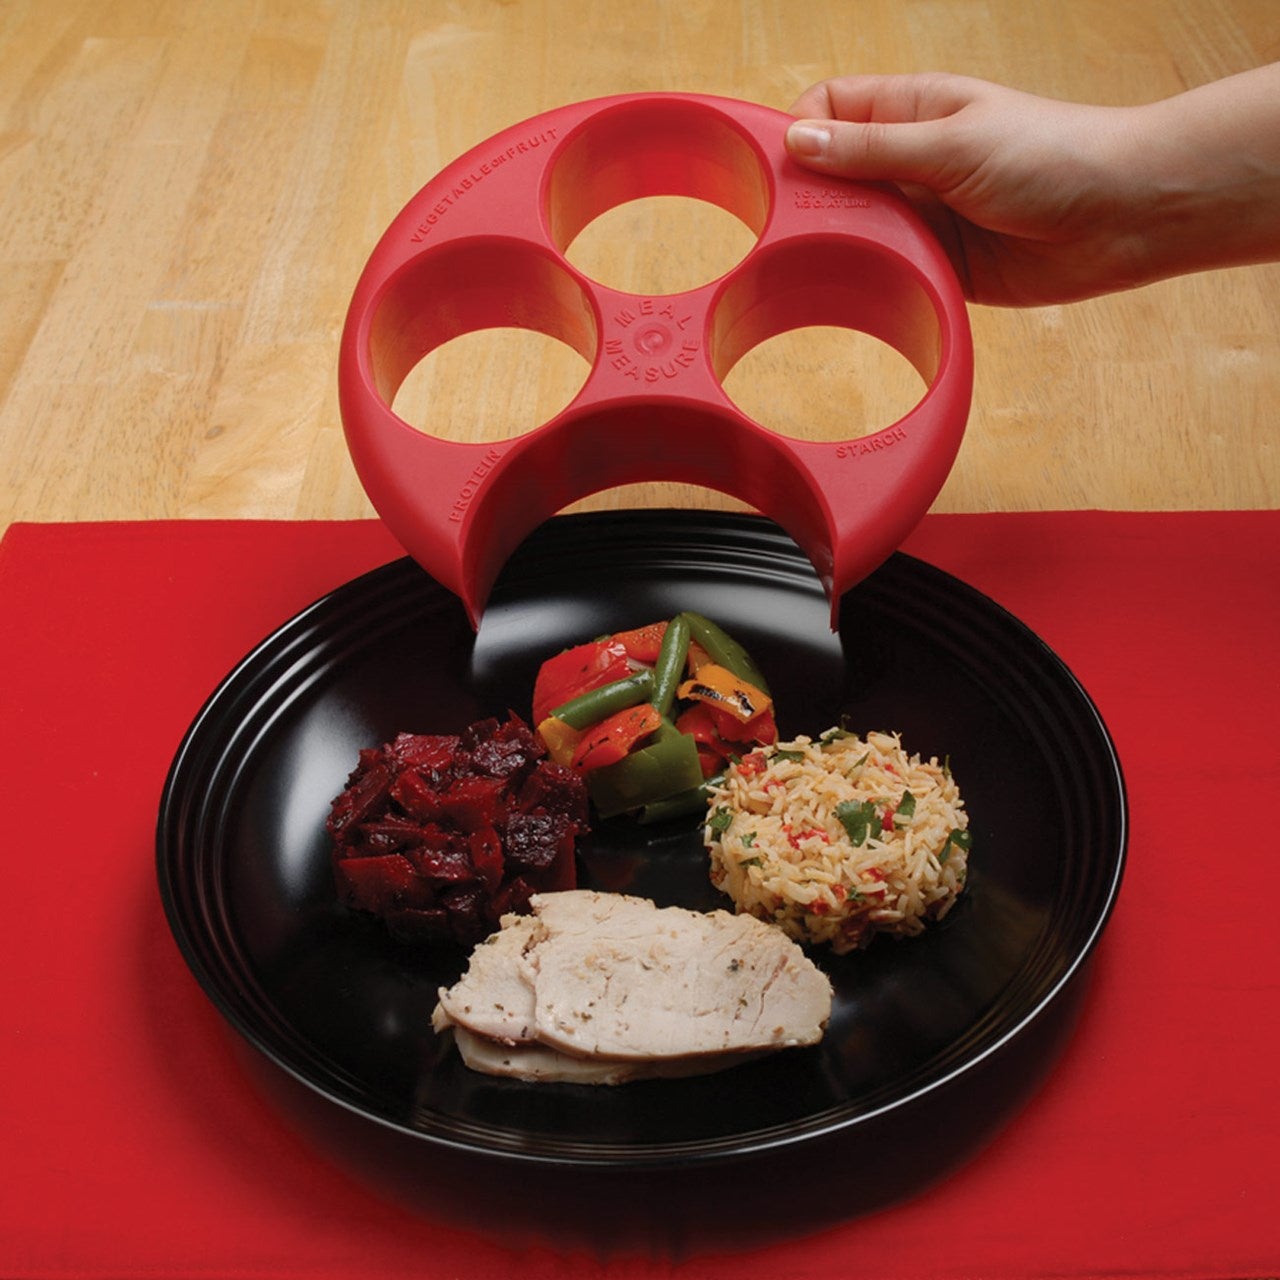 REVIEW - Healthy Steps Portion Control Serving Utensils - From